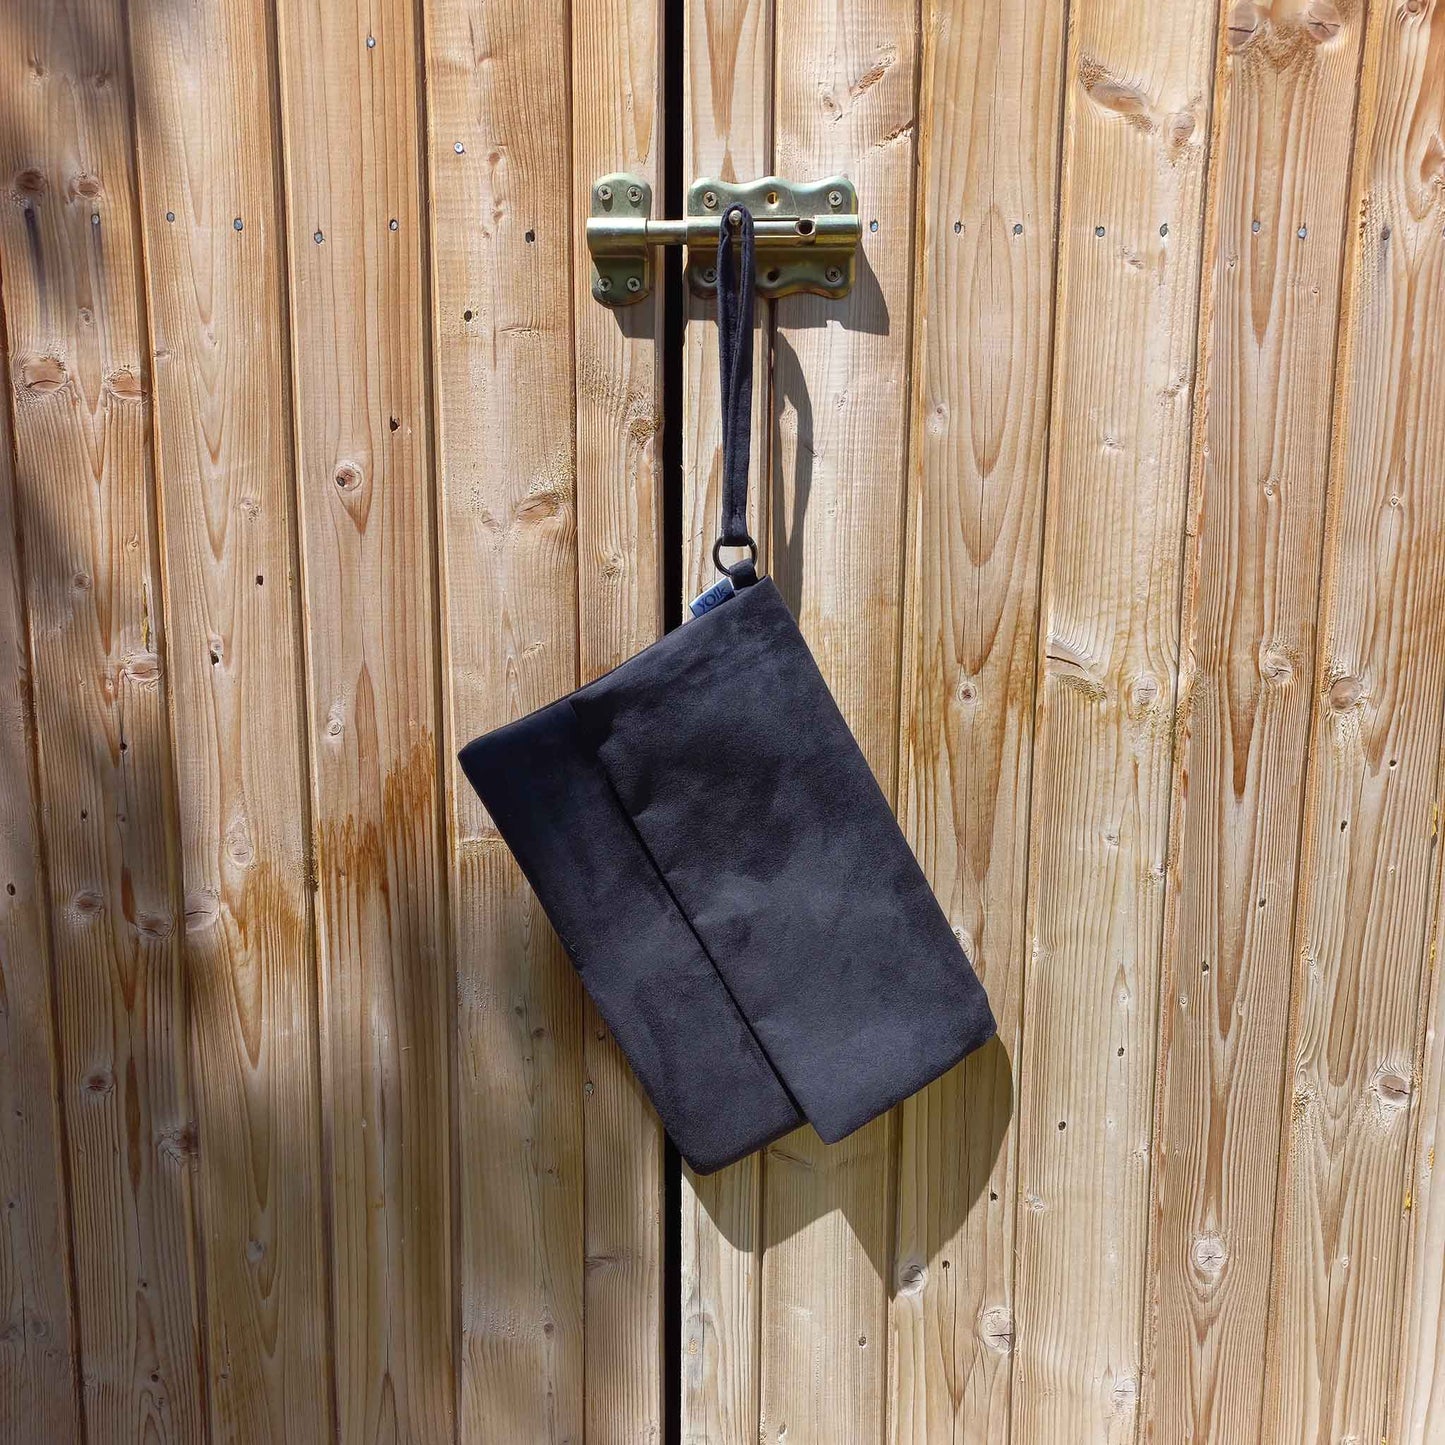 Black suede clutch bag hanging from a shed door